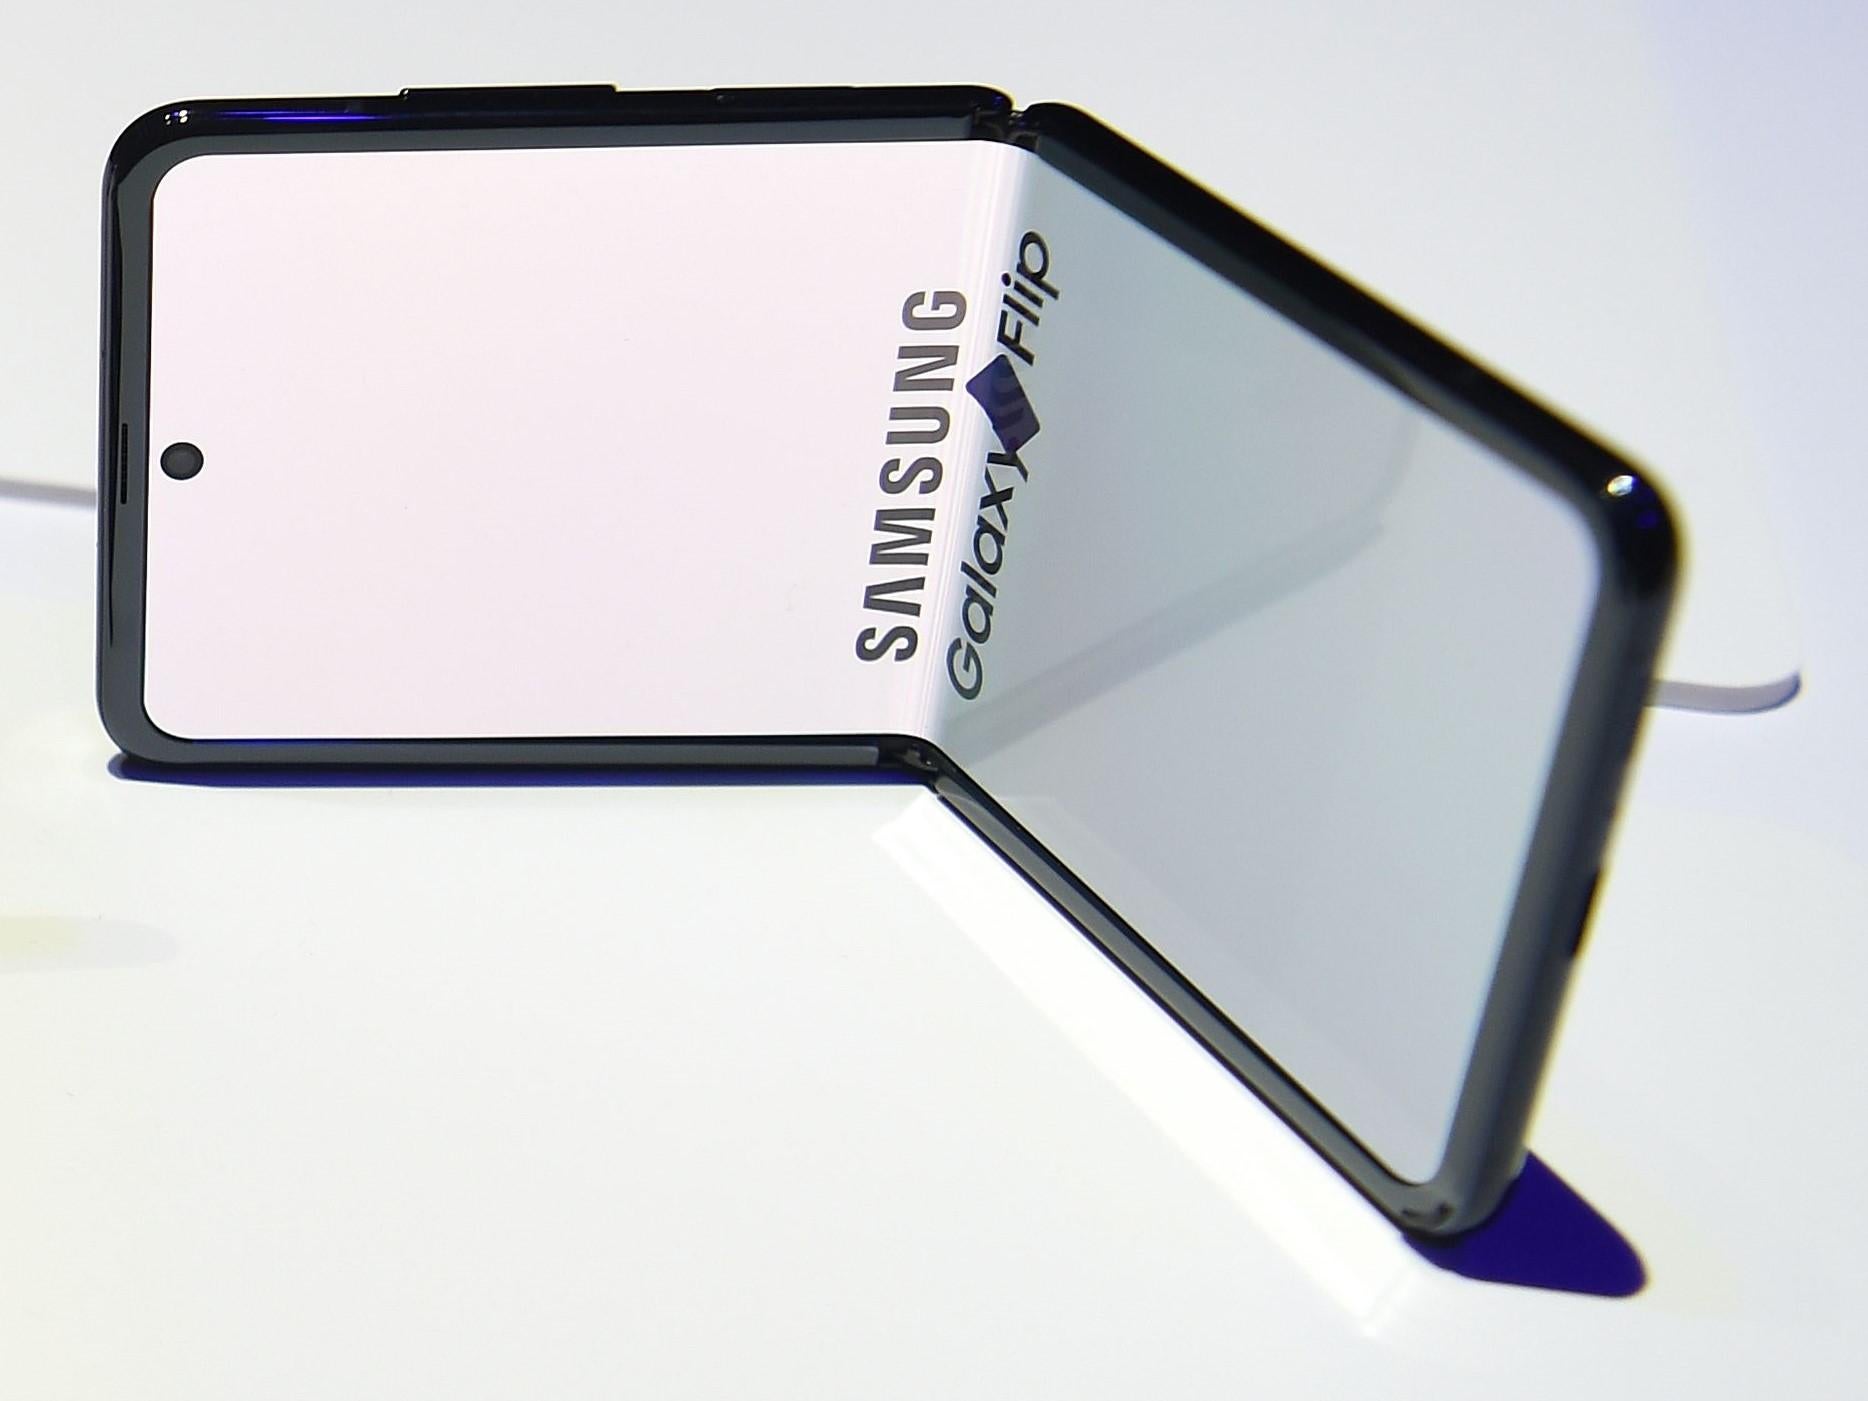 A Samsung Galaxy Z Flip phone on display during the Unpacked 2020 event in San Francisco, California on 11 February, 2020